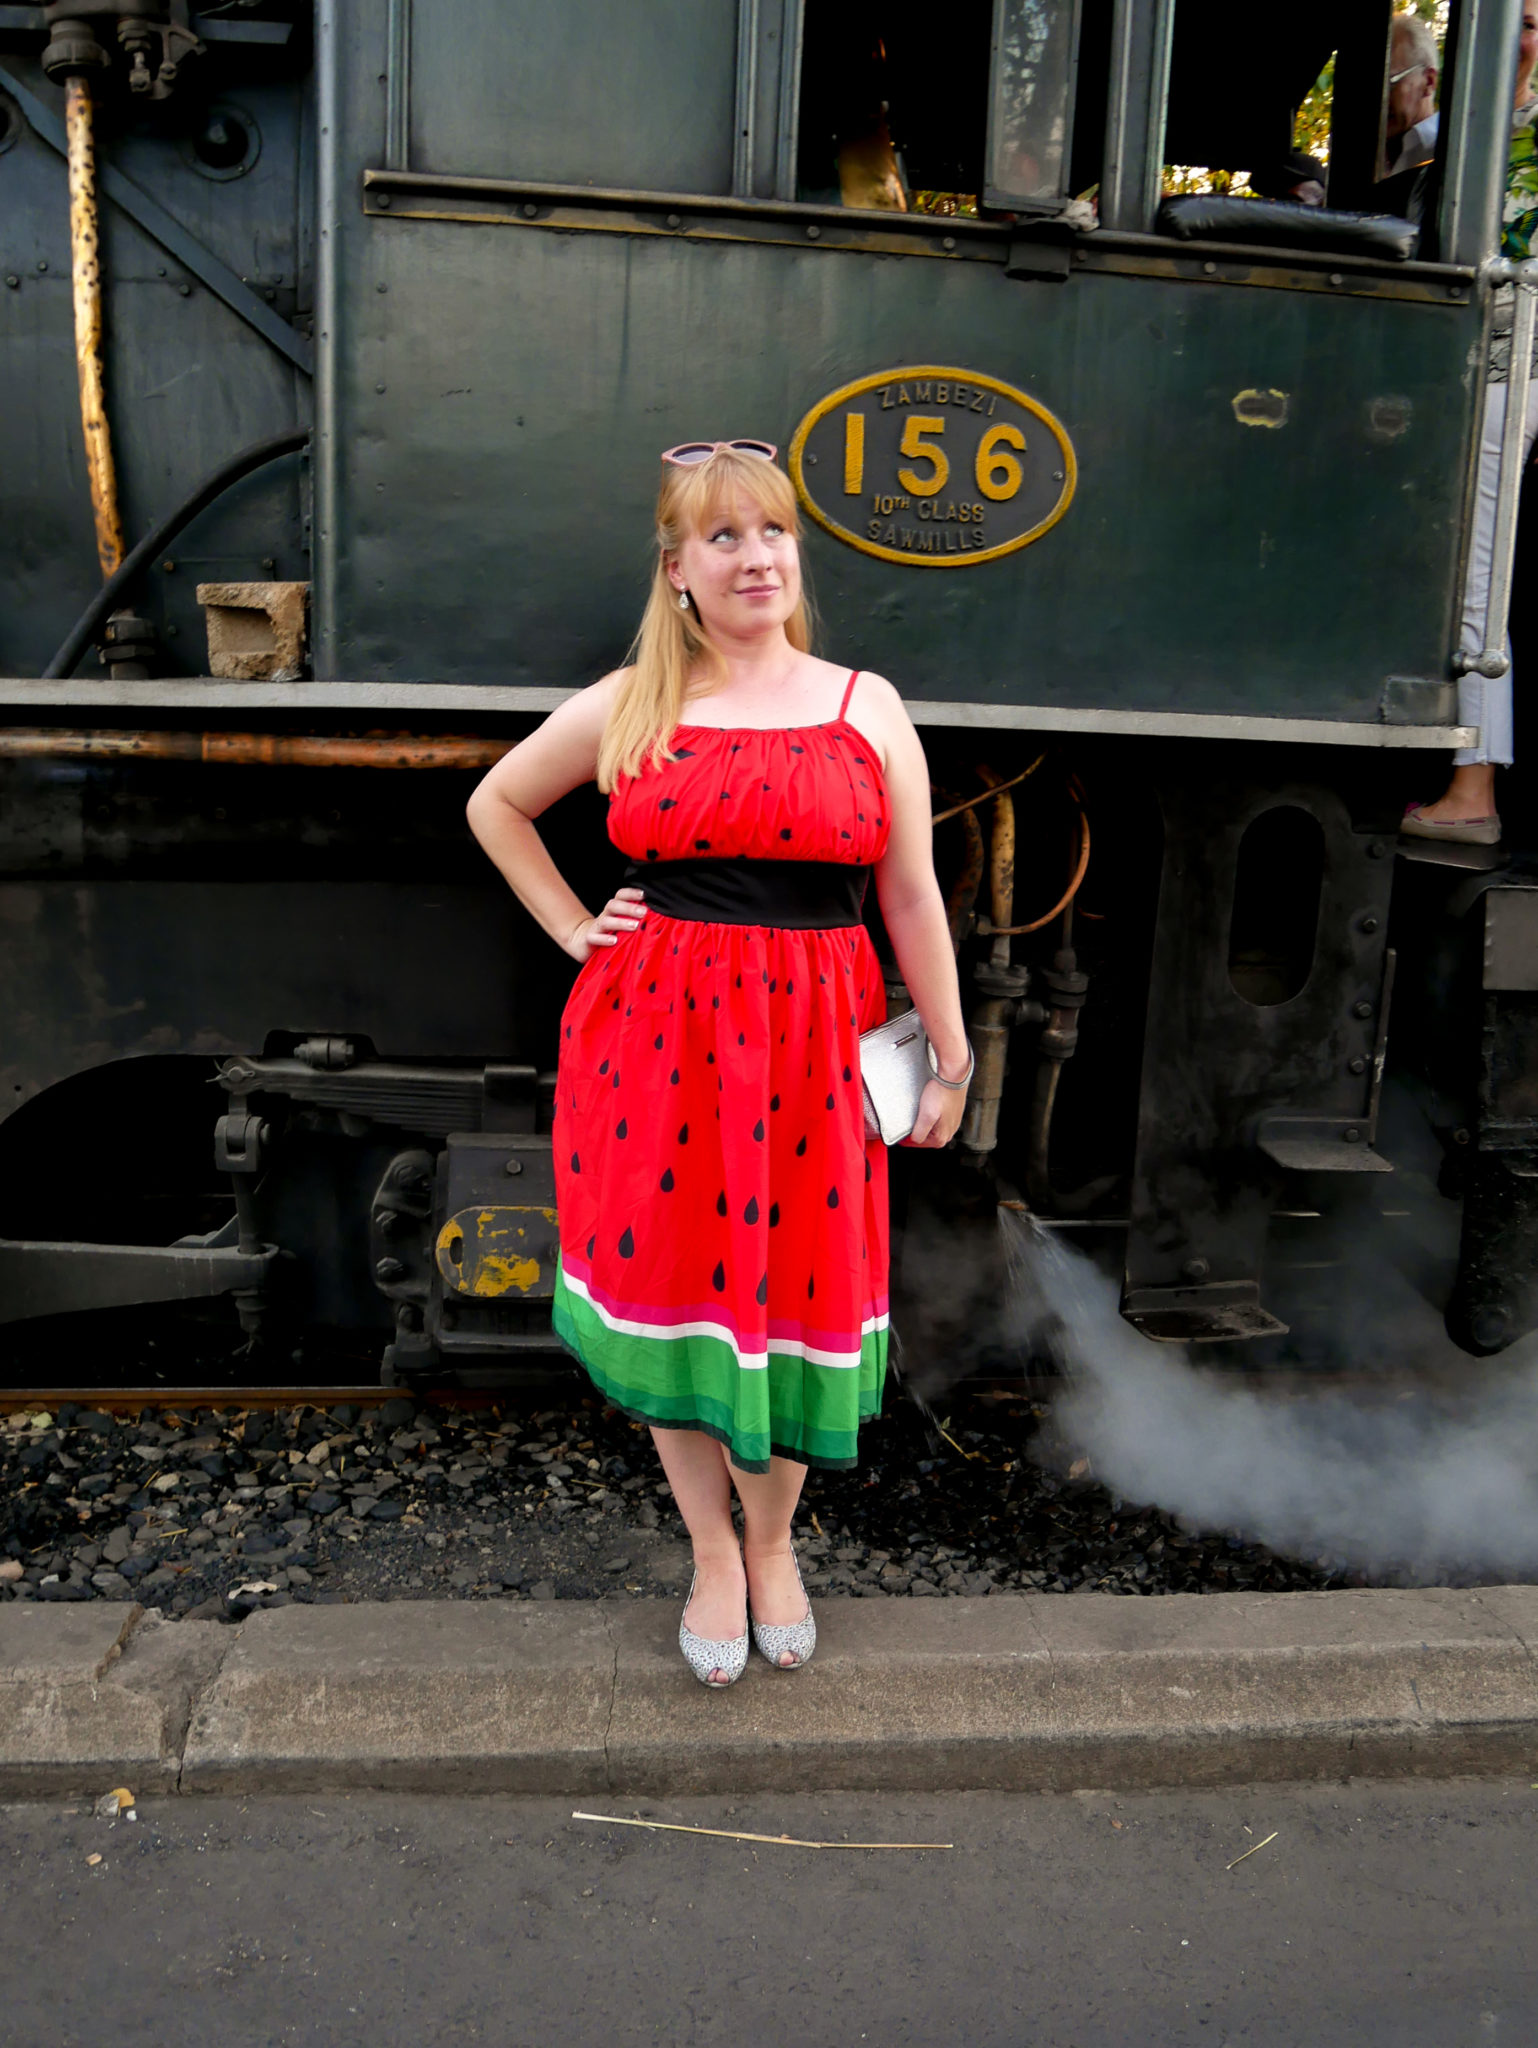 Rosie stands in a red dress by the side of the Royal Livingstone Express steam engine 156